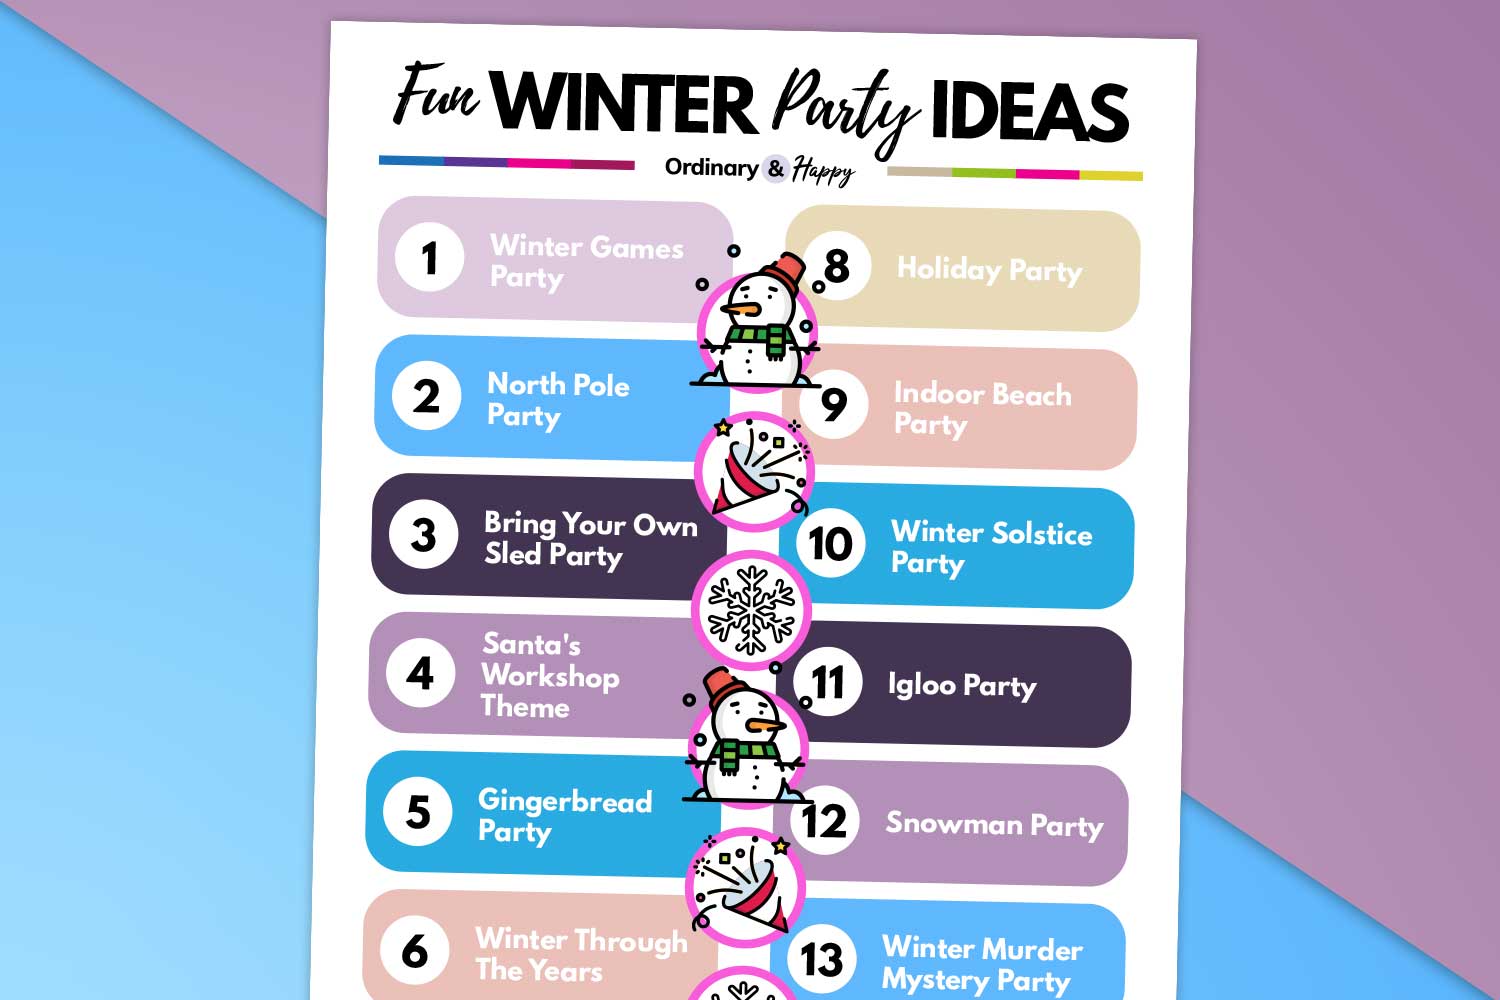 20+ Best Winter Party Ideas to Celebrate with Family in Friends in Style